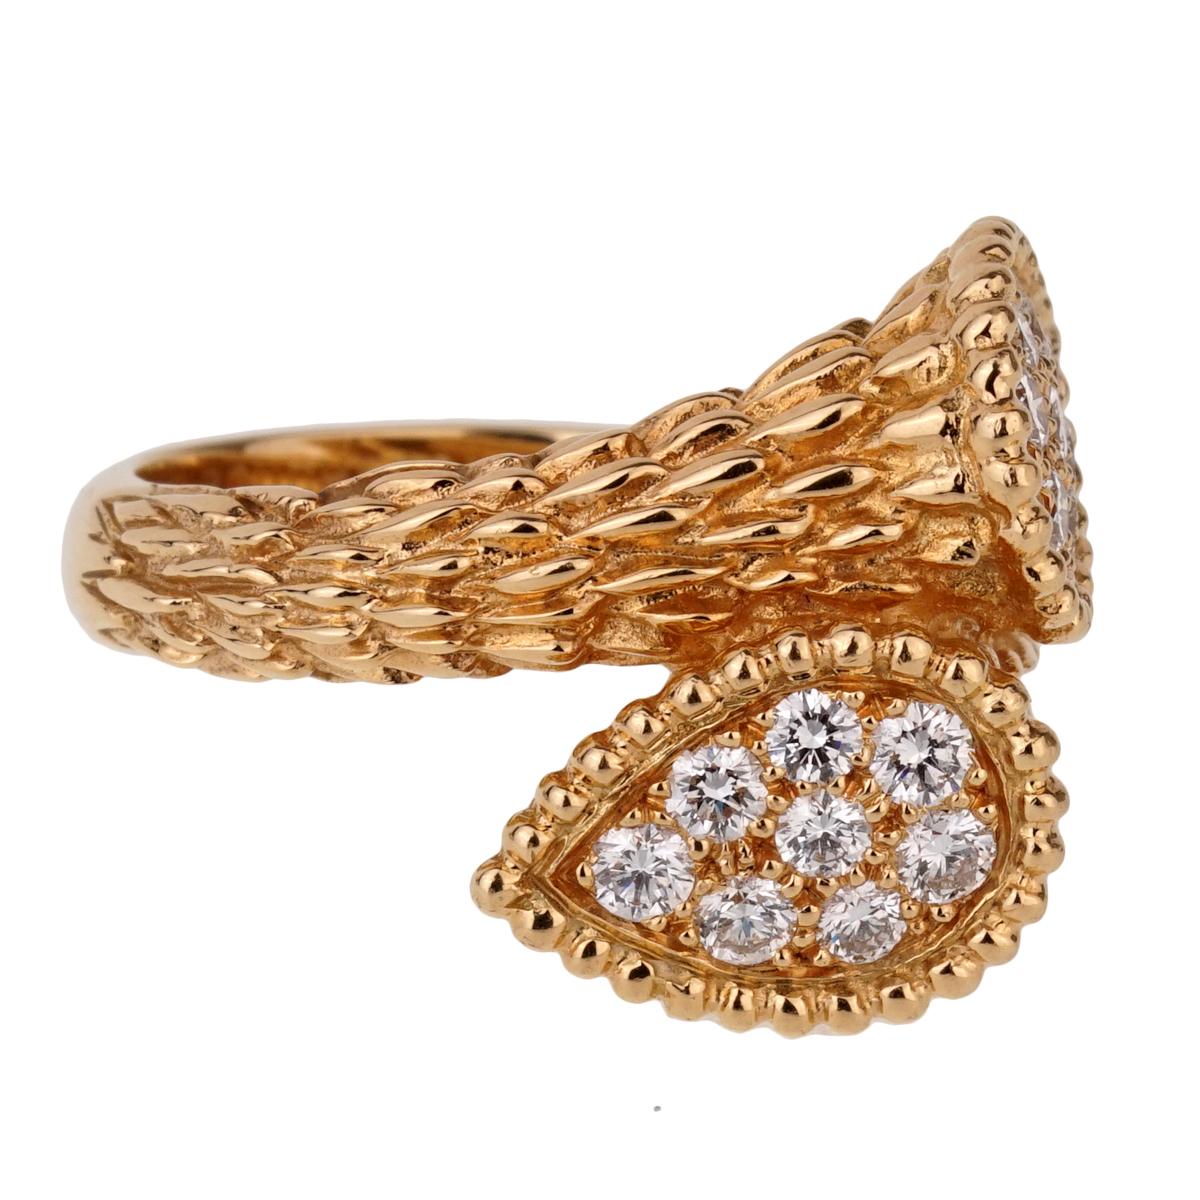 An iconic Boucheron diamond ring from the Serpent Boheme collection featuring 16 of the finest Boucheron round brilliant cut diamonds set in 18k yellow gold. 

The ring is a size 6 and is resizeable
Sku: 1060